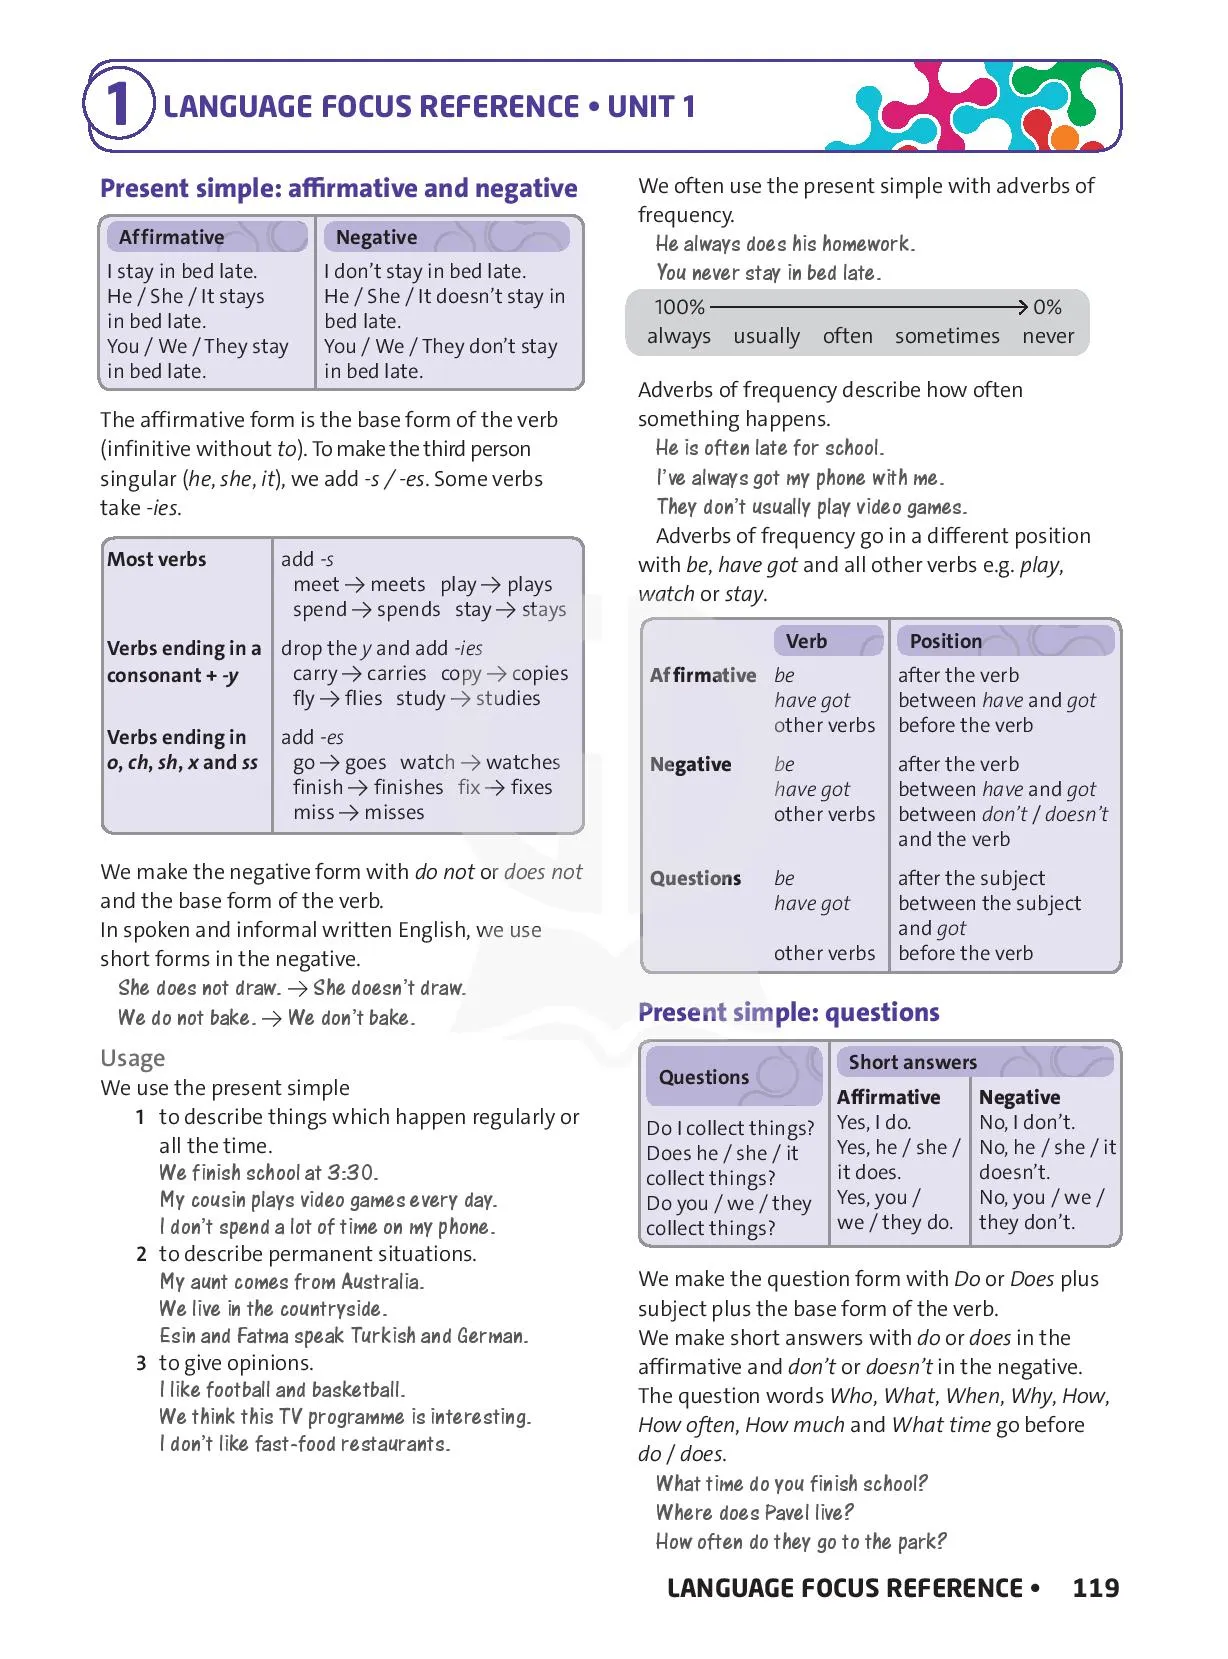 Language focus reference - UNIT 1 My time